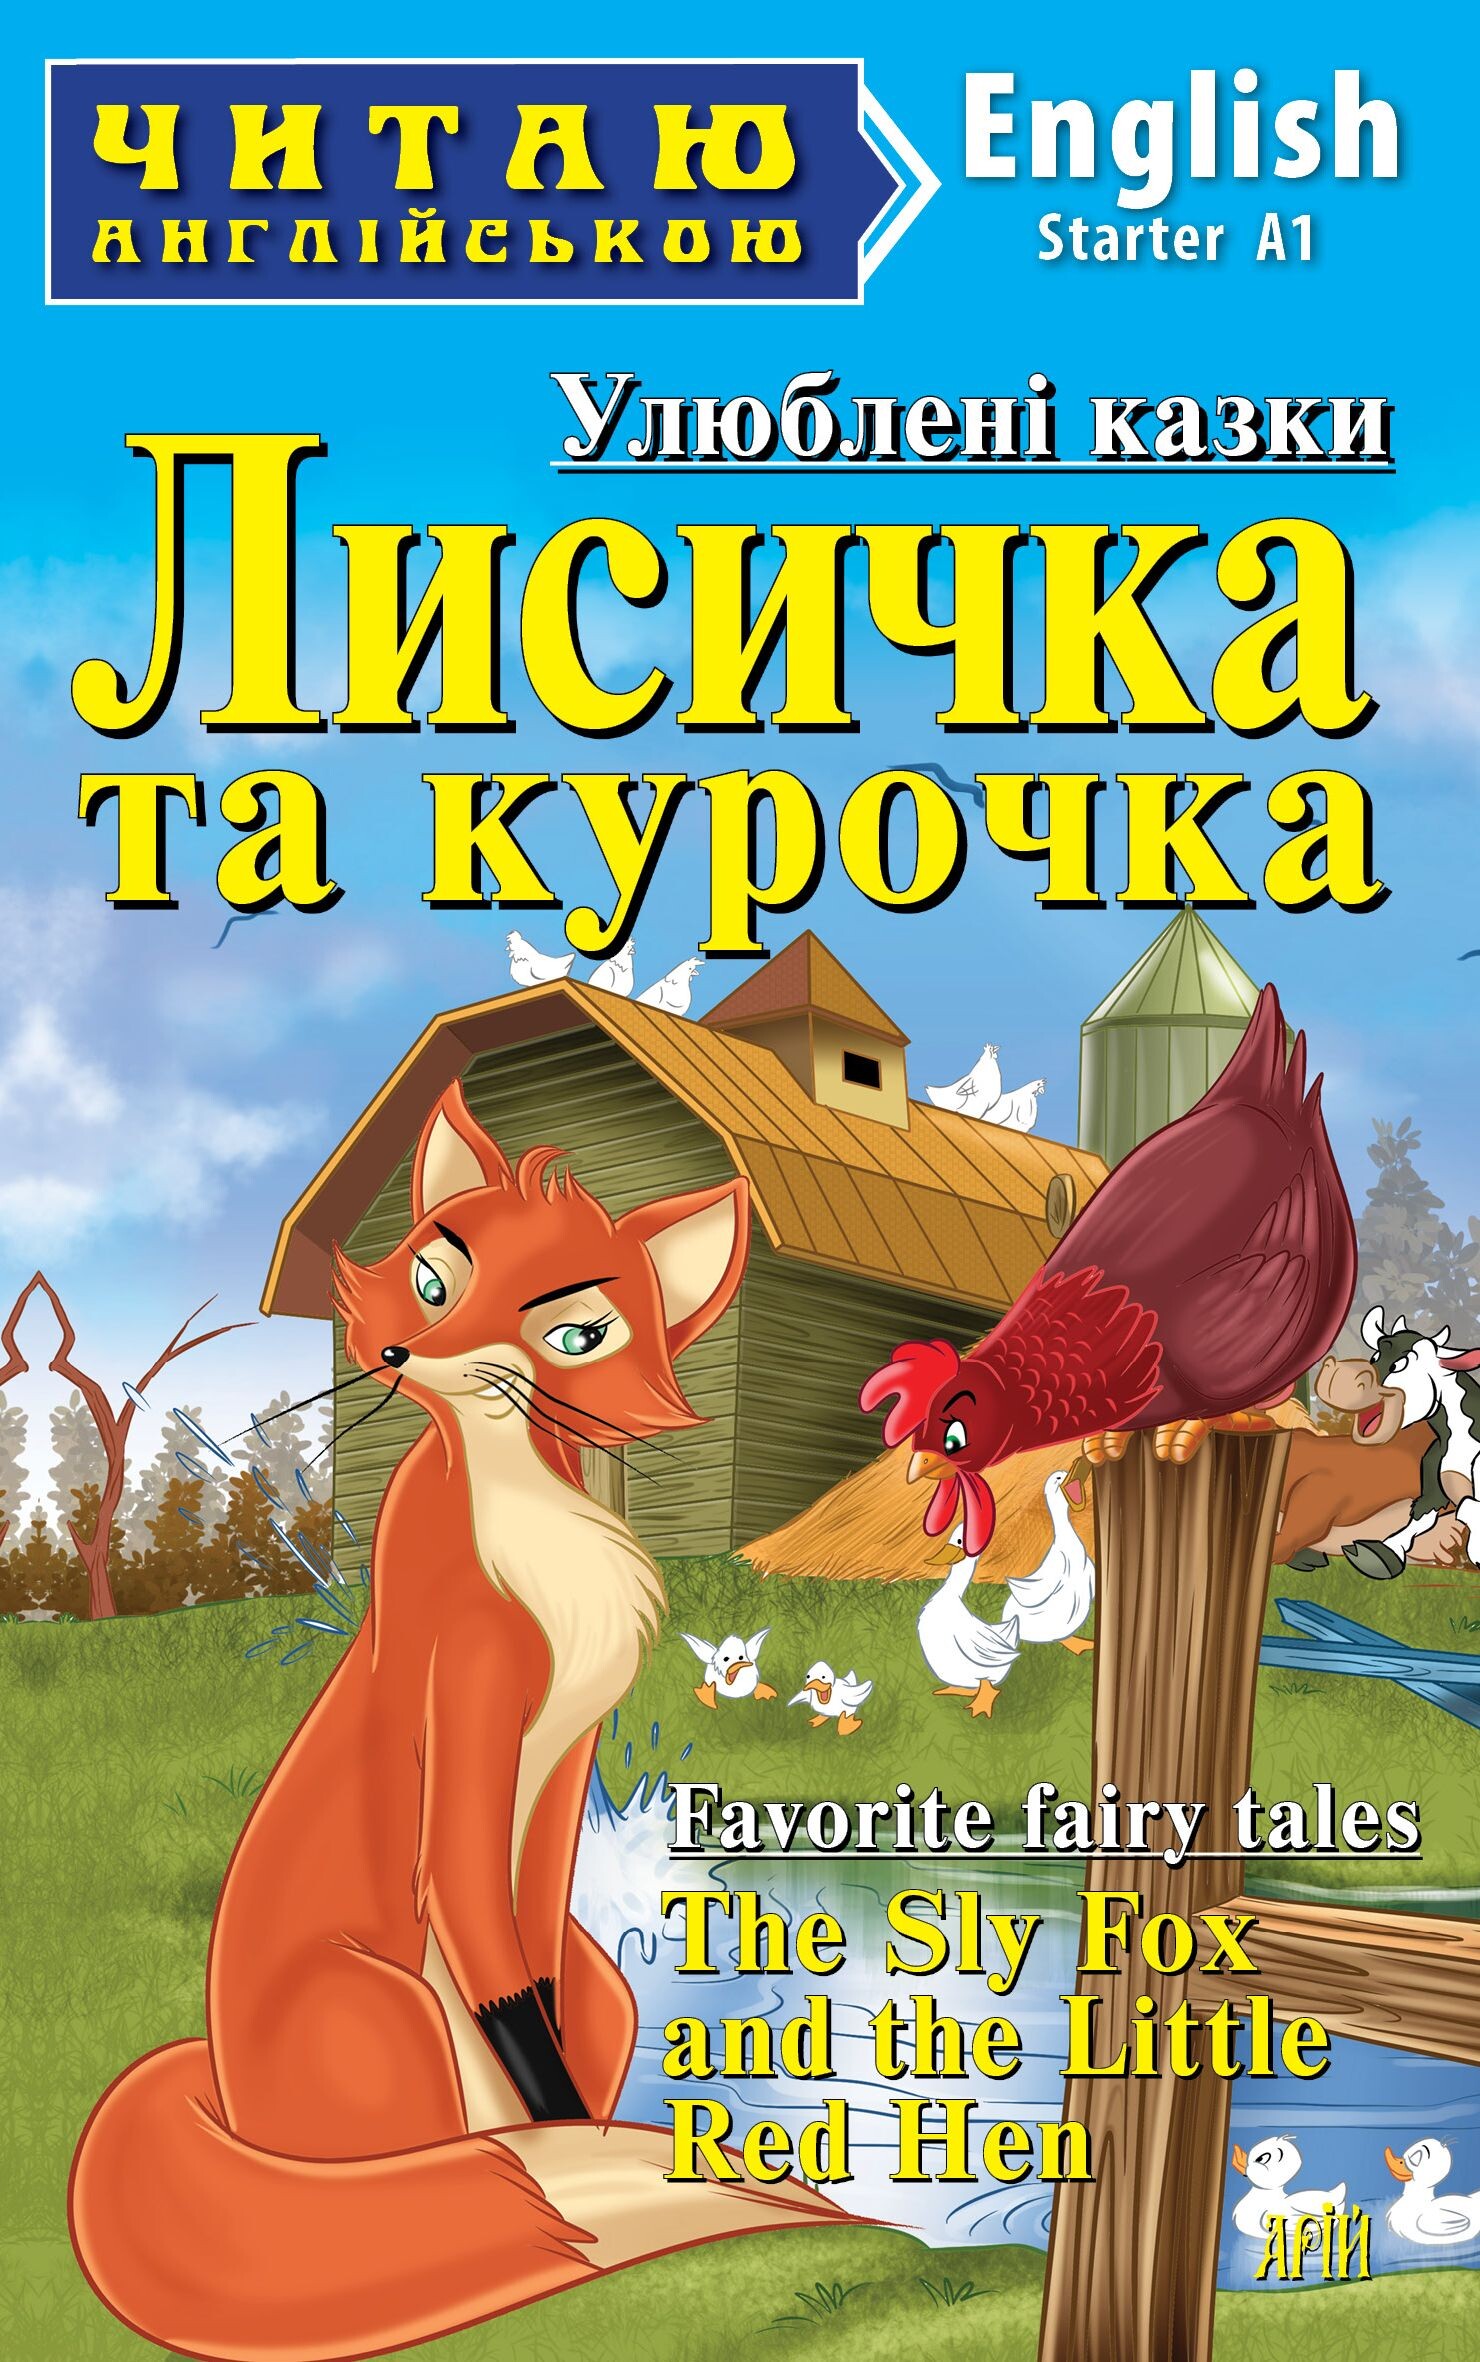 Лисичка та курочка / The Sly Fox and the Little Red Hen - Vivat